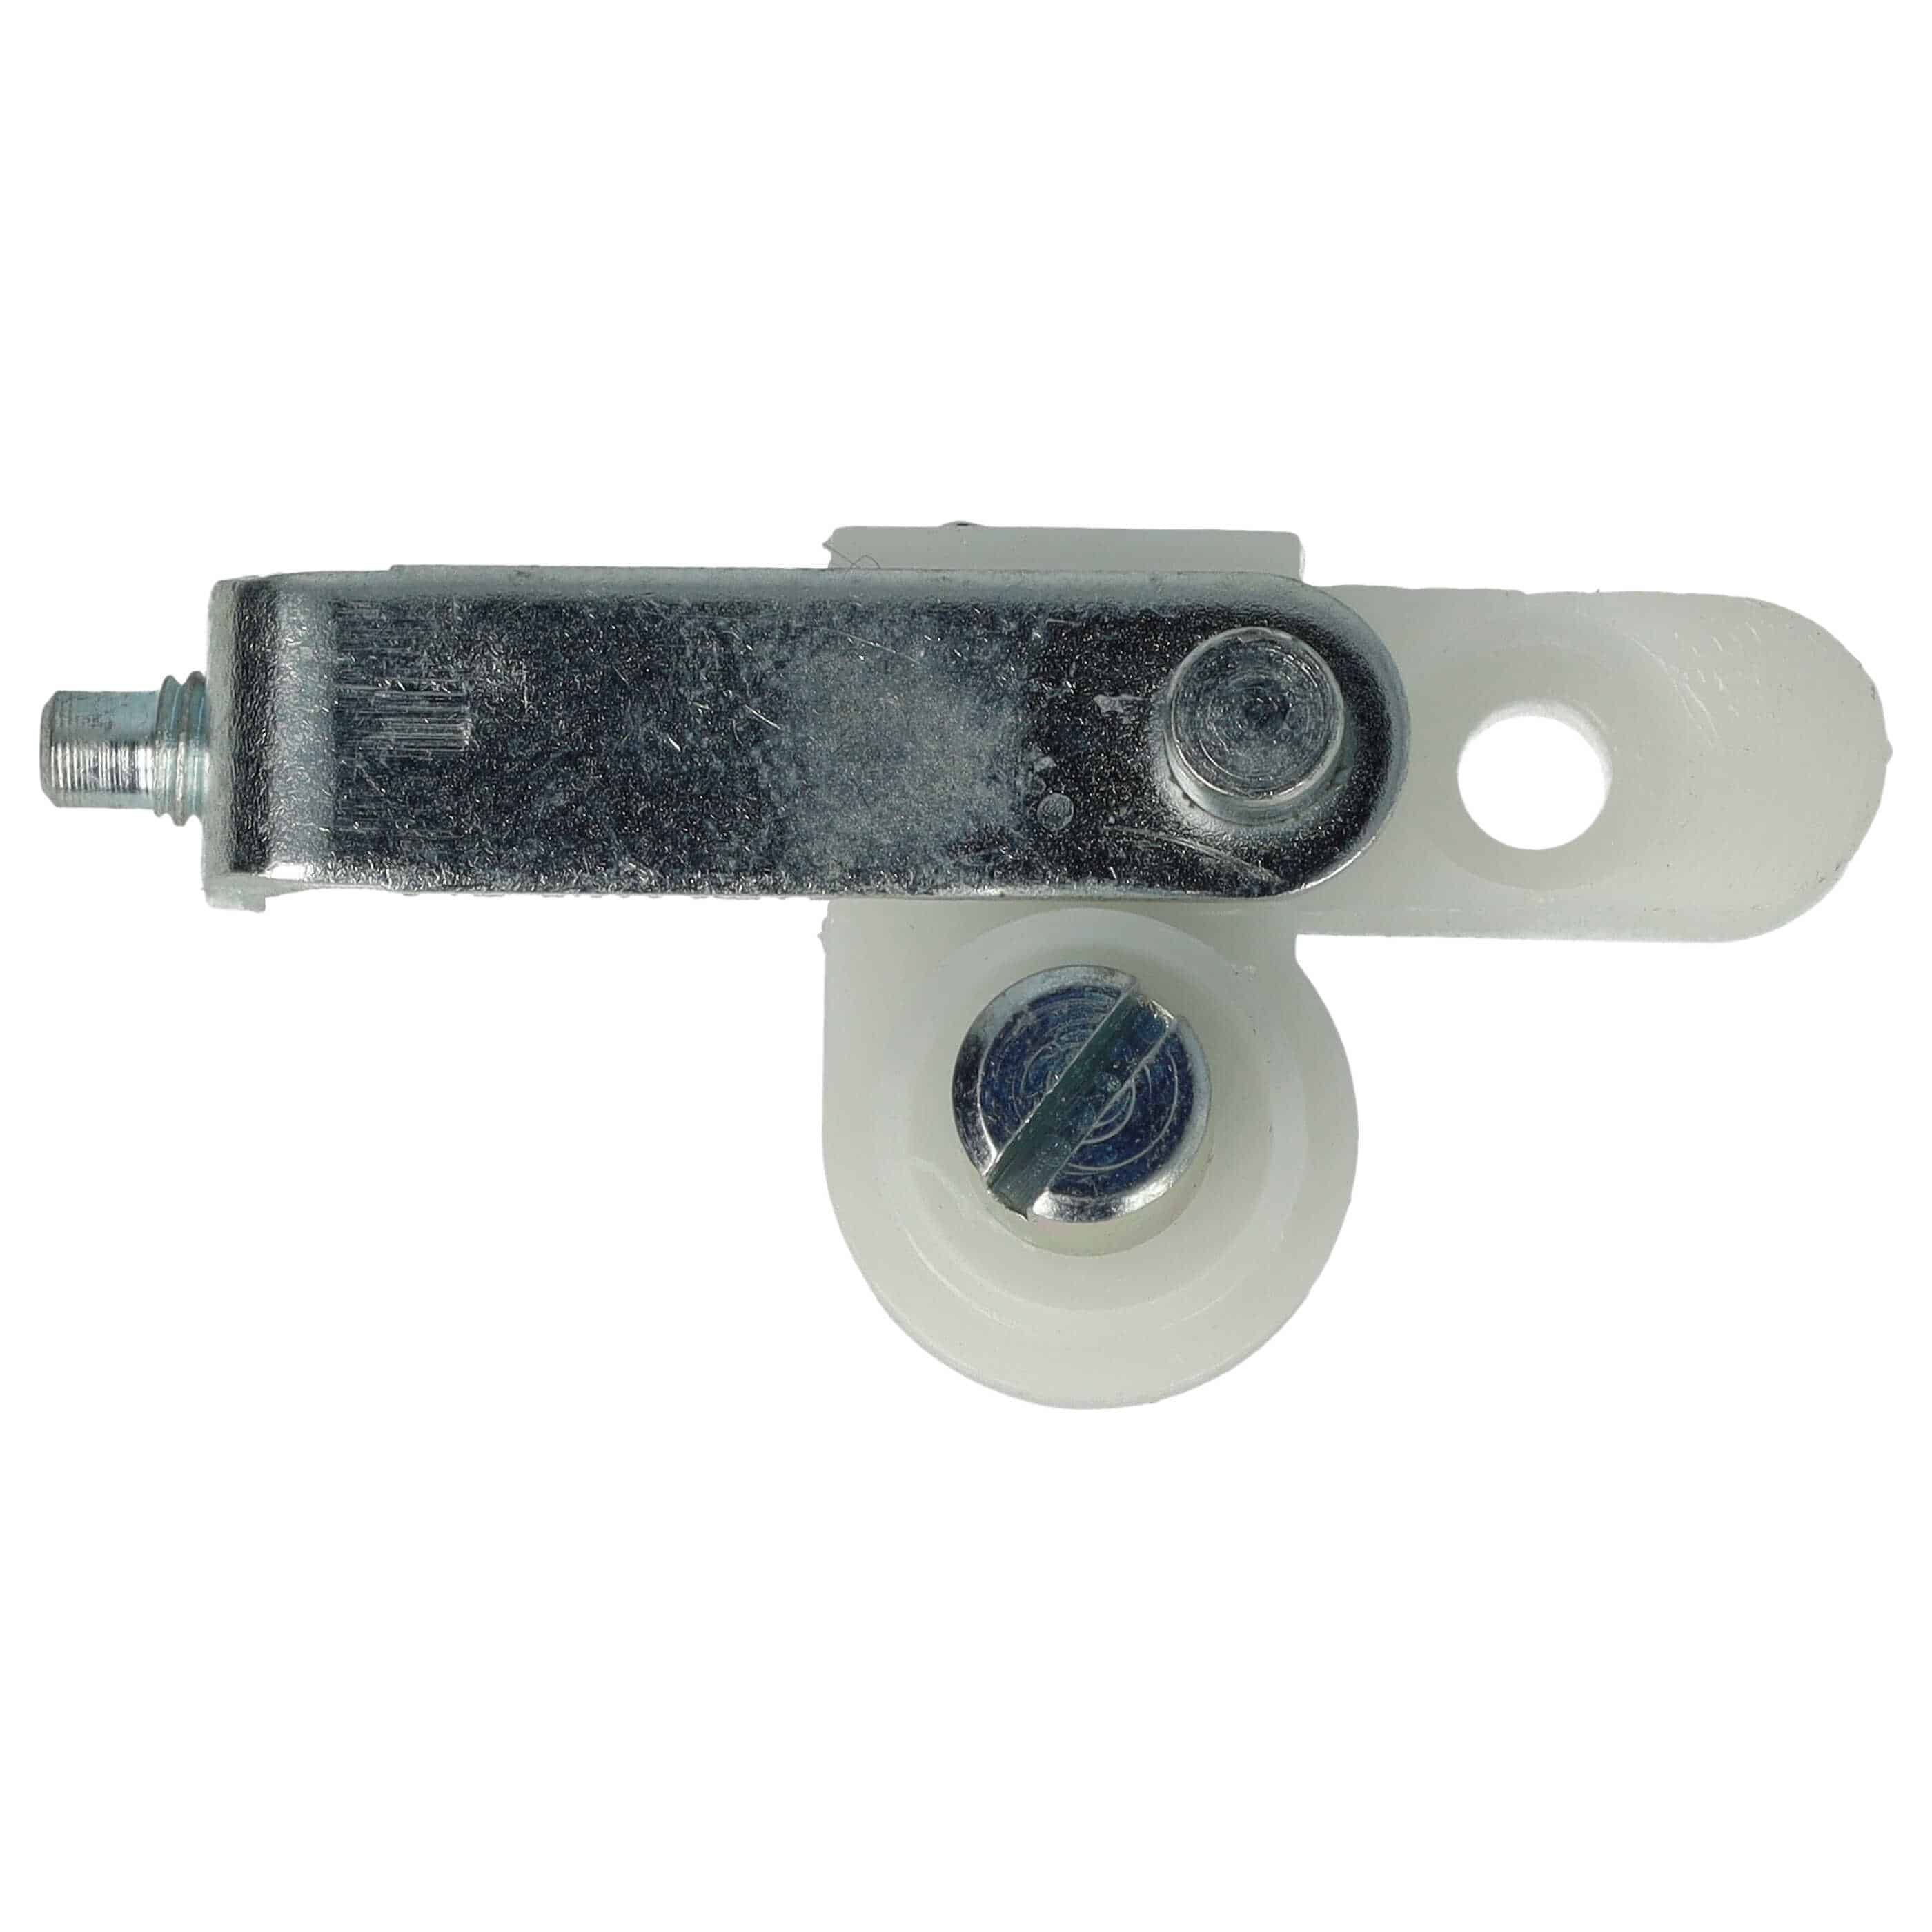 Side-Mounted Chain Tensioner, Adjusting Screw suitable for Stihl 017 Power Saw etc.